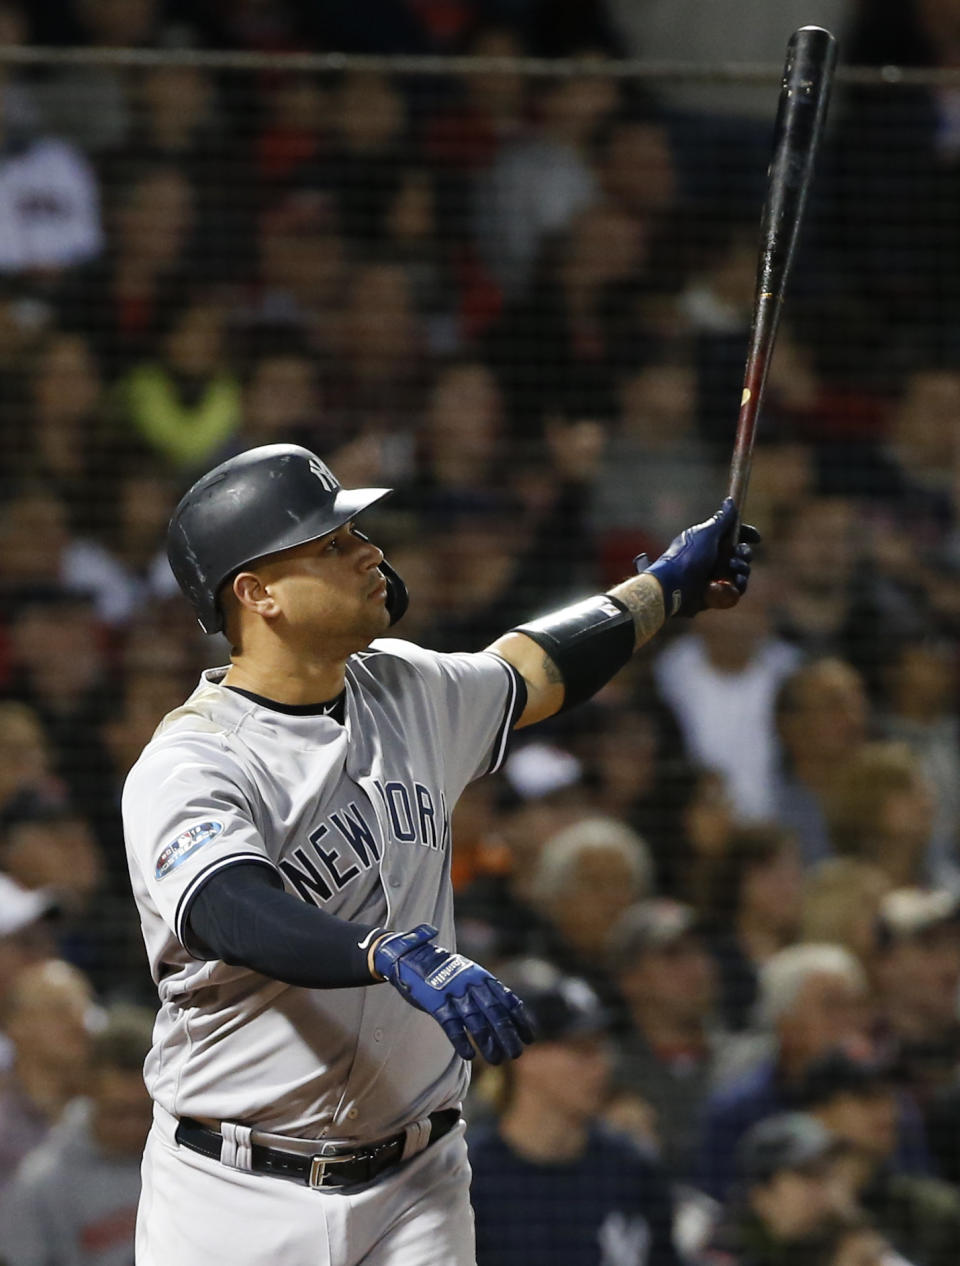 New York Yankees' Gary Sanchez watches his three-run home run against the Boston Red Sox during the seventh inning of Game 2 of a baseball American League Division Series, Saturday, Oct. 6, 2018, in Boston. (AP Photo/Elise Amendola)